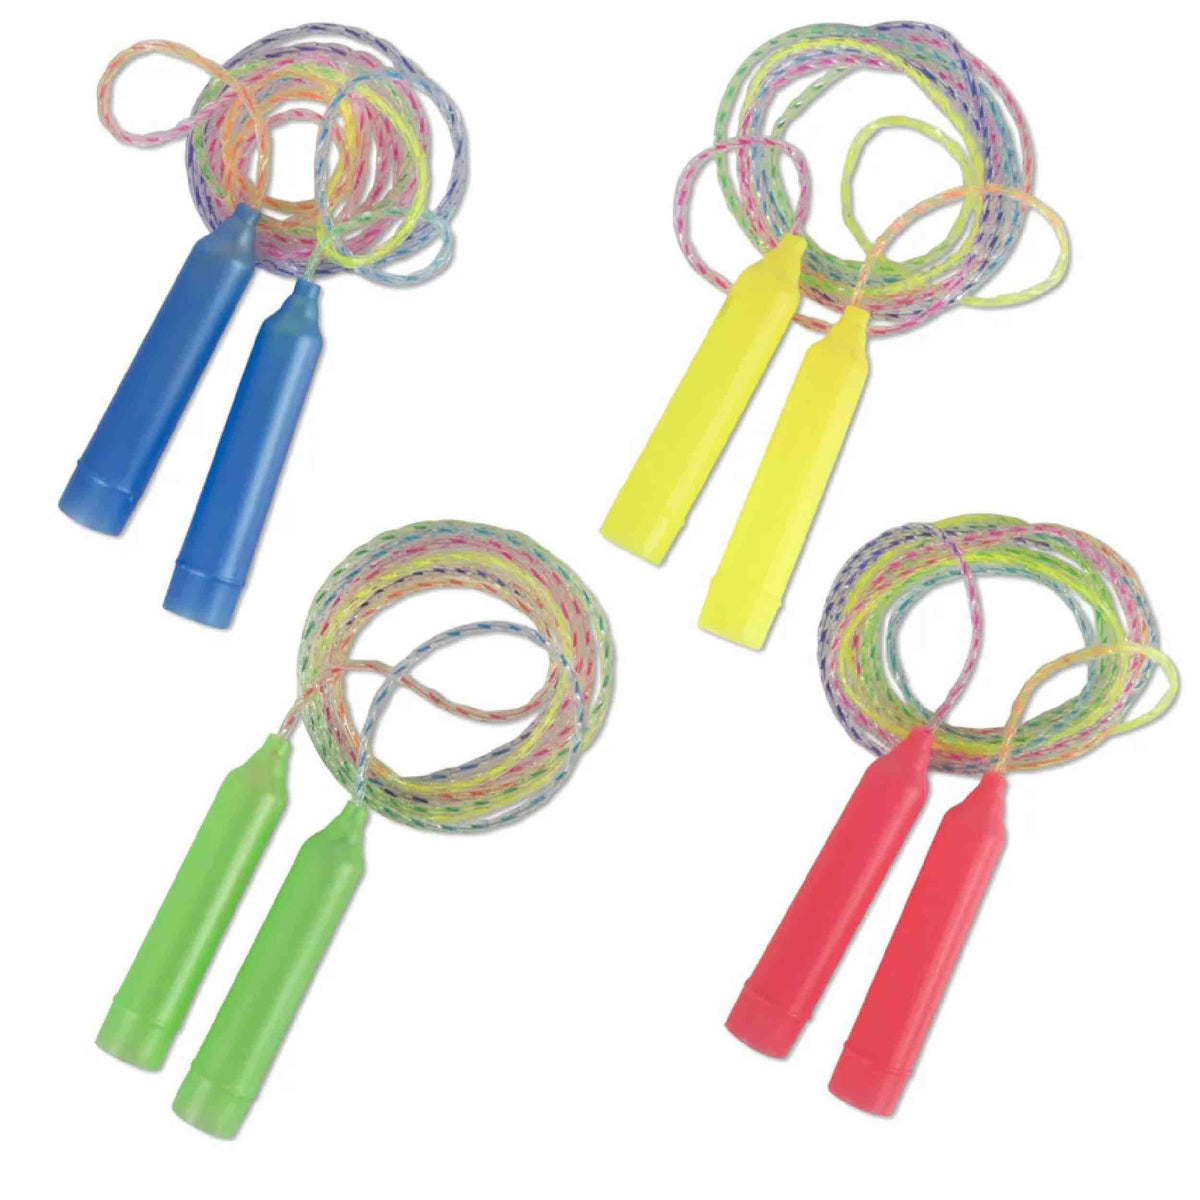 Bulk Rainbow Jump Rope Toy For Kids - Assorted